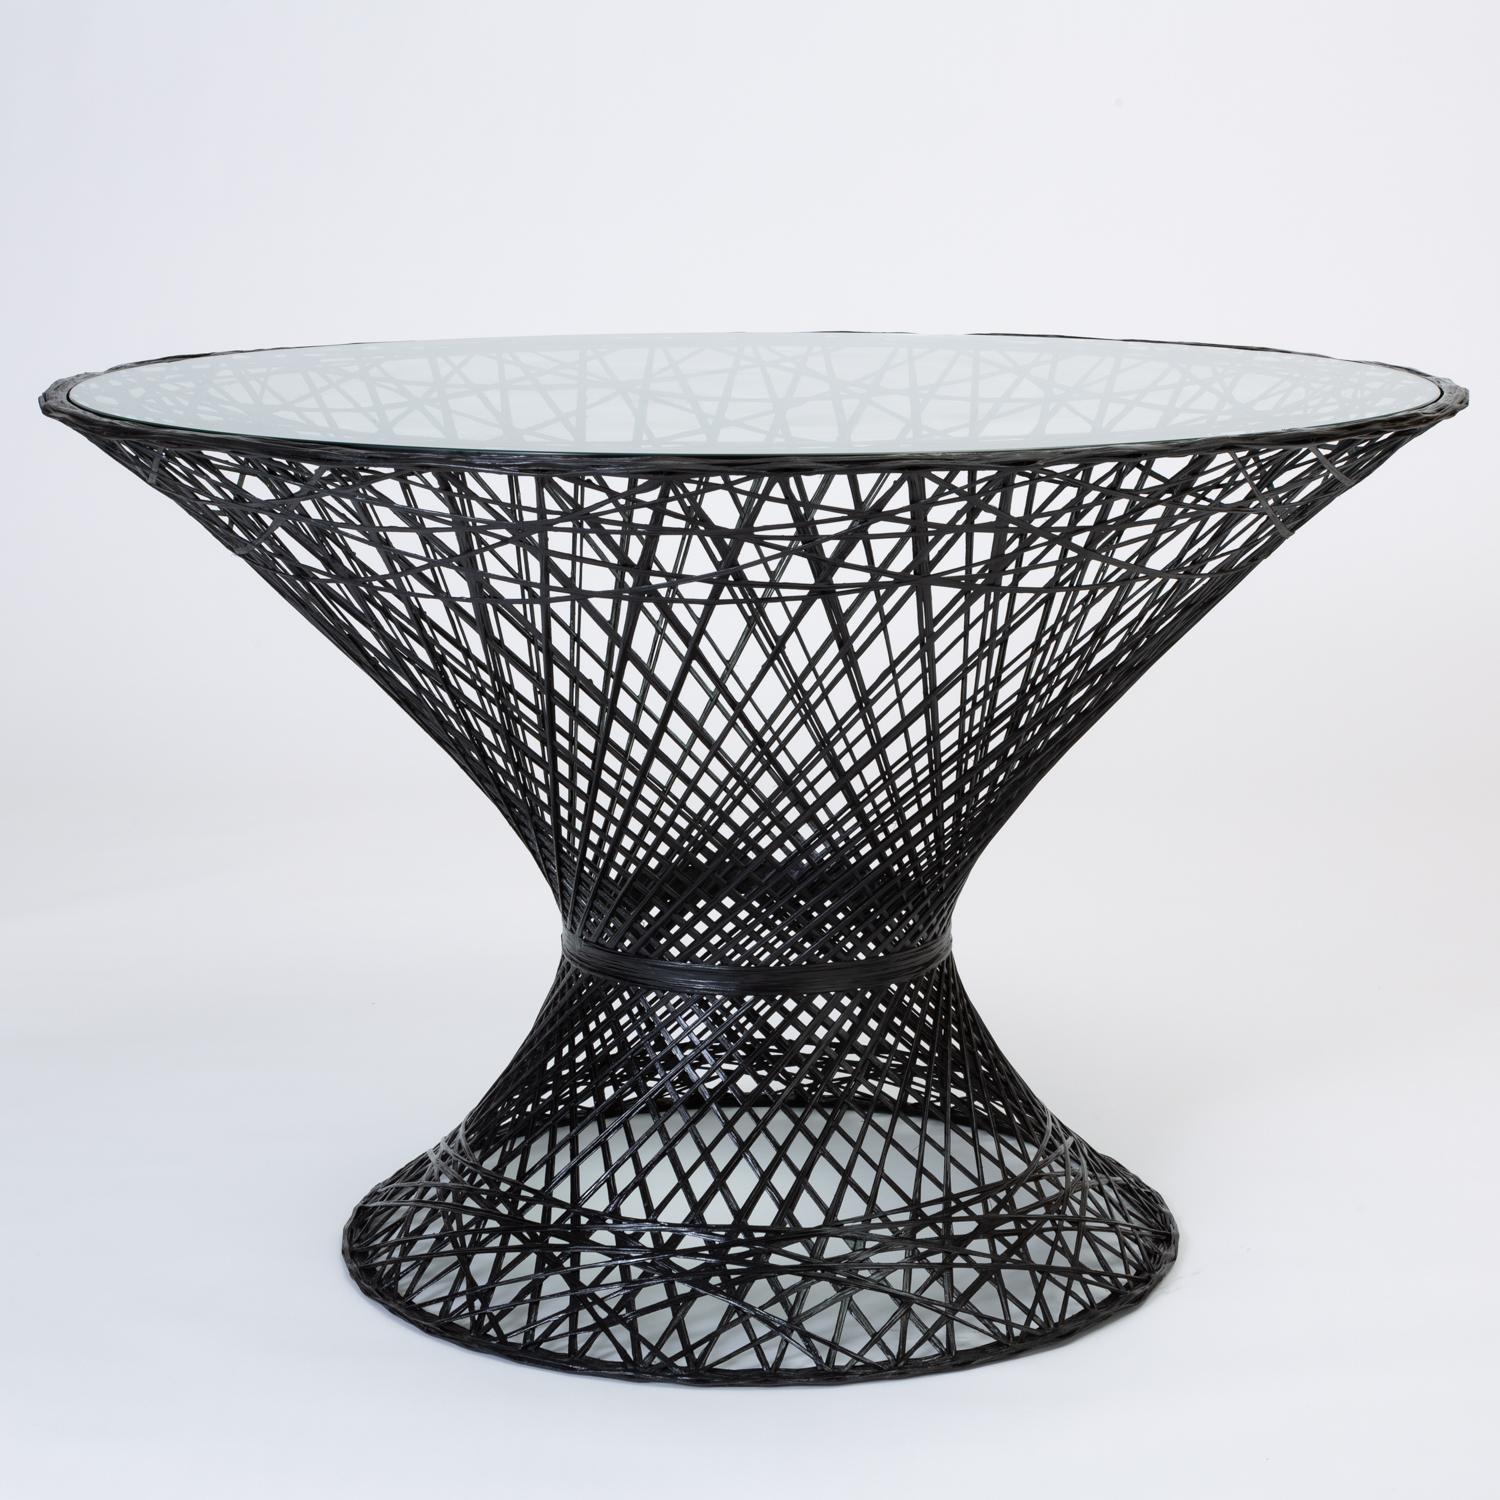 A dining table by Russell Woodard for his family company's popular line of spun fiberglass patio furniture. The design features an hourglass shape and round pedestal base. The frame is described by an intricate lattice of fiberglass spokes with a